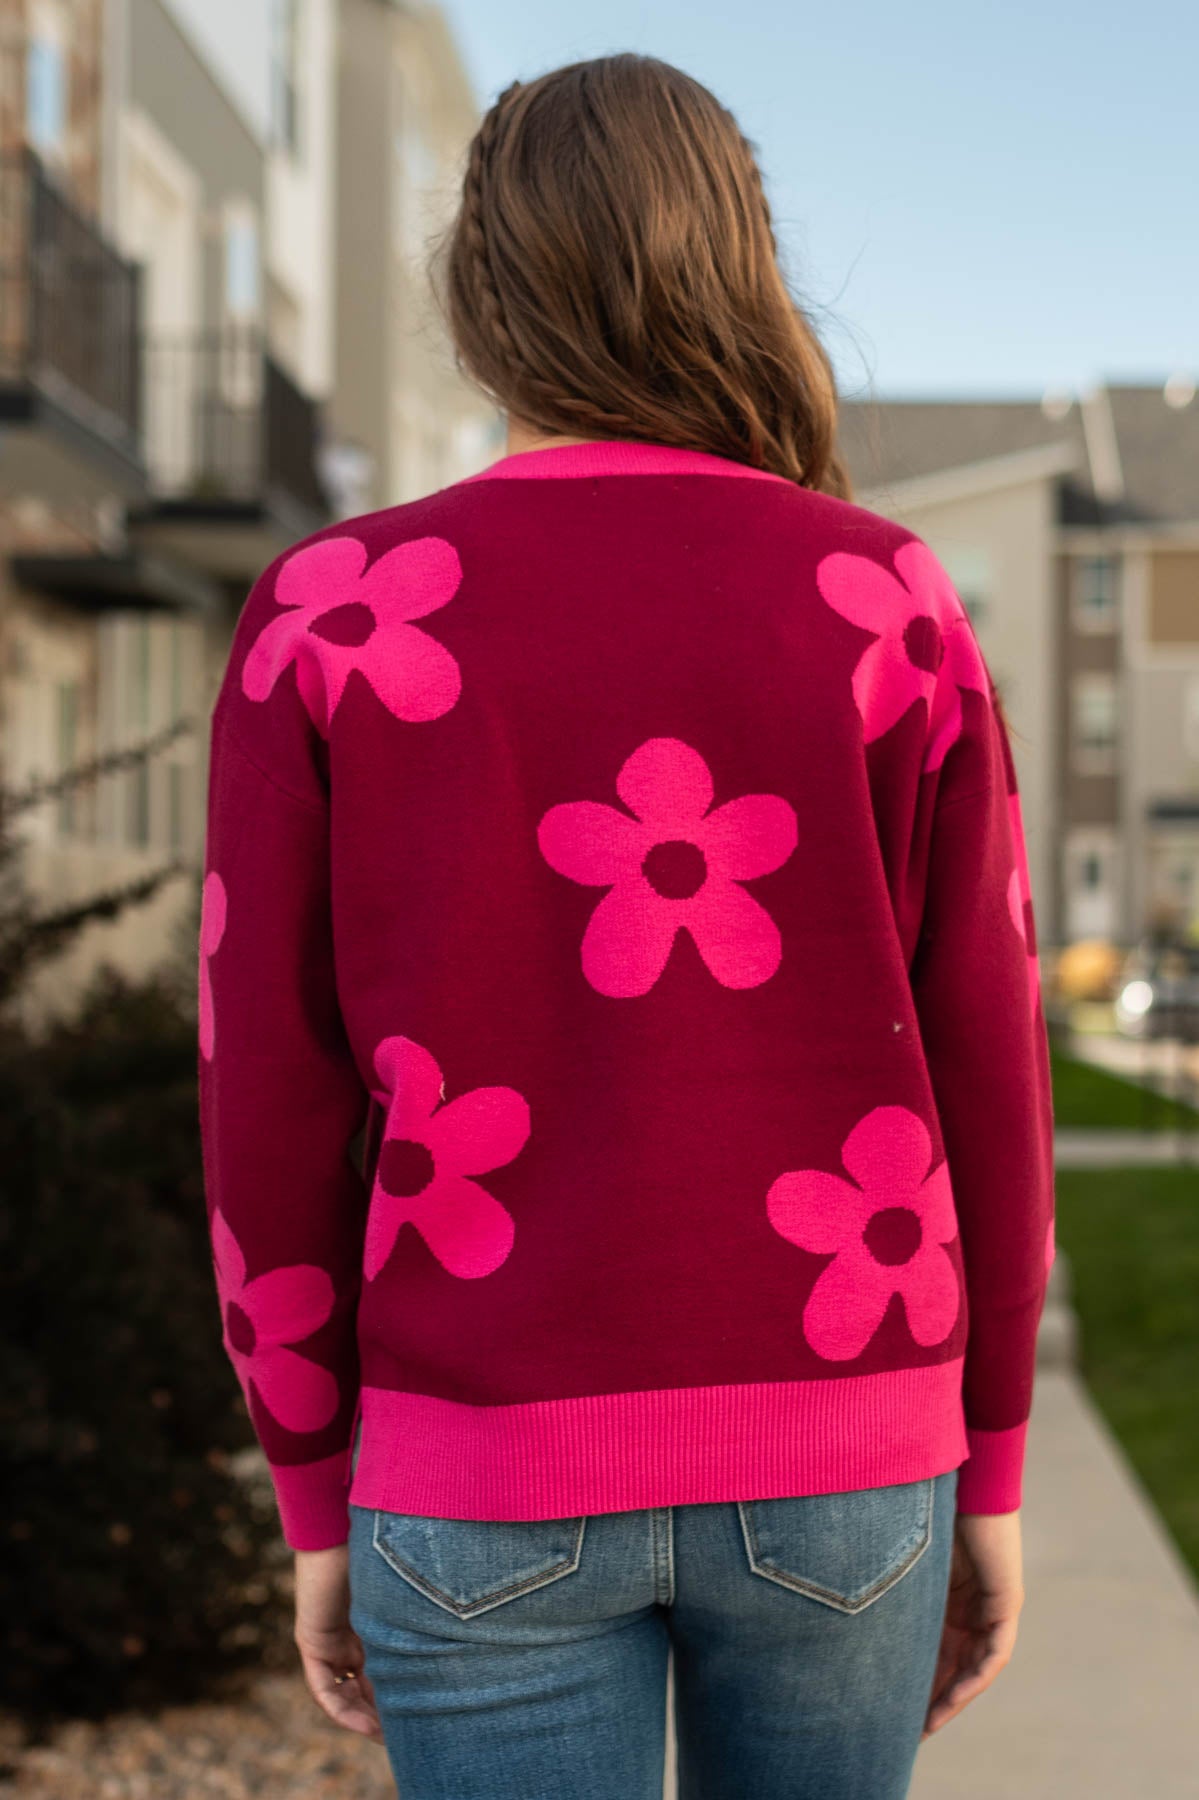 Back view of a raspberry sweater